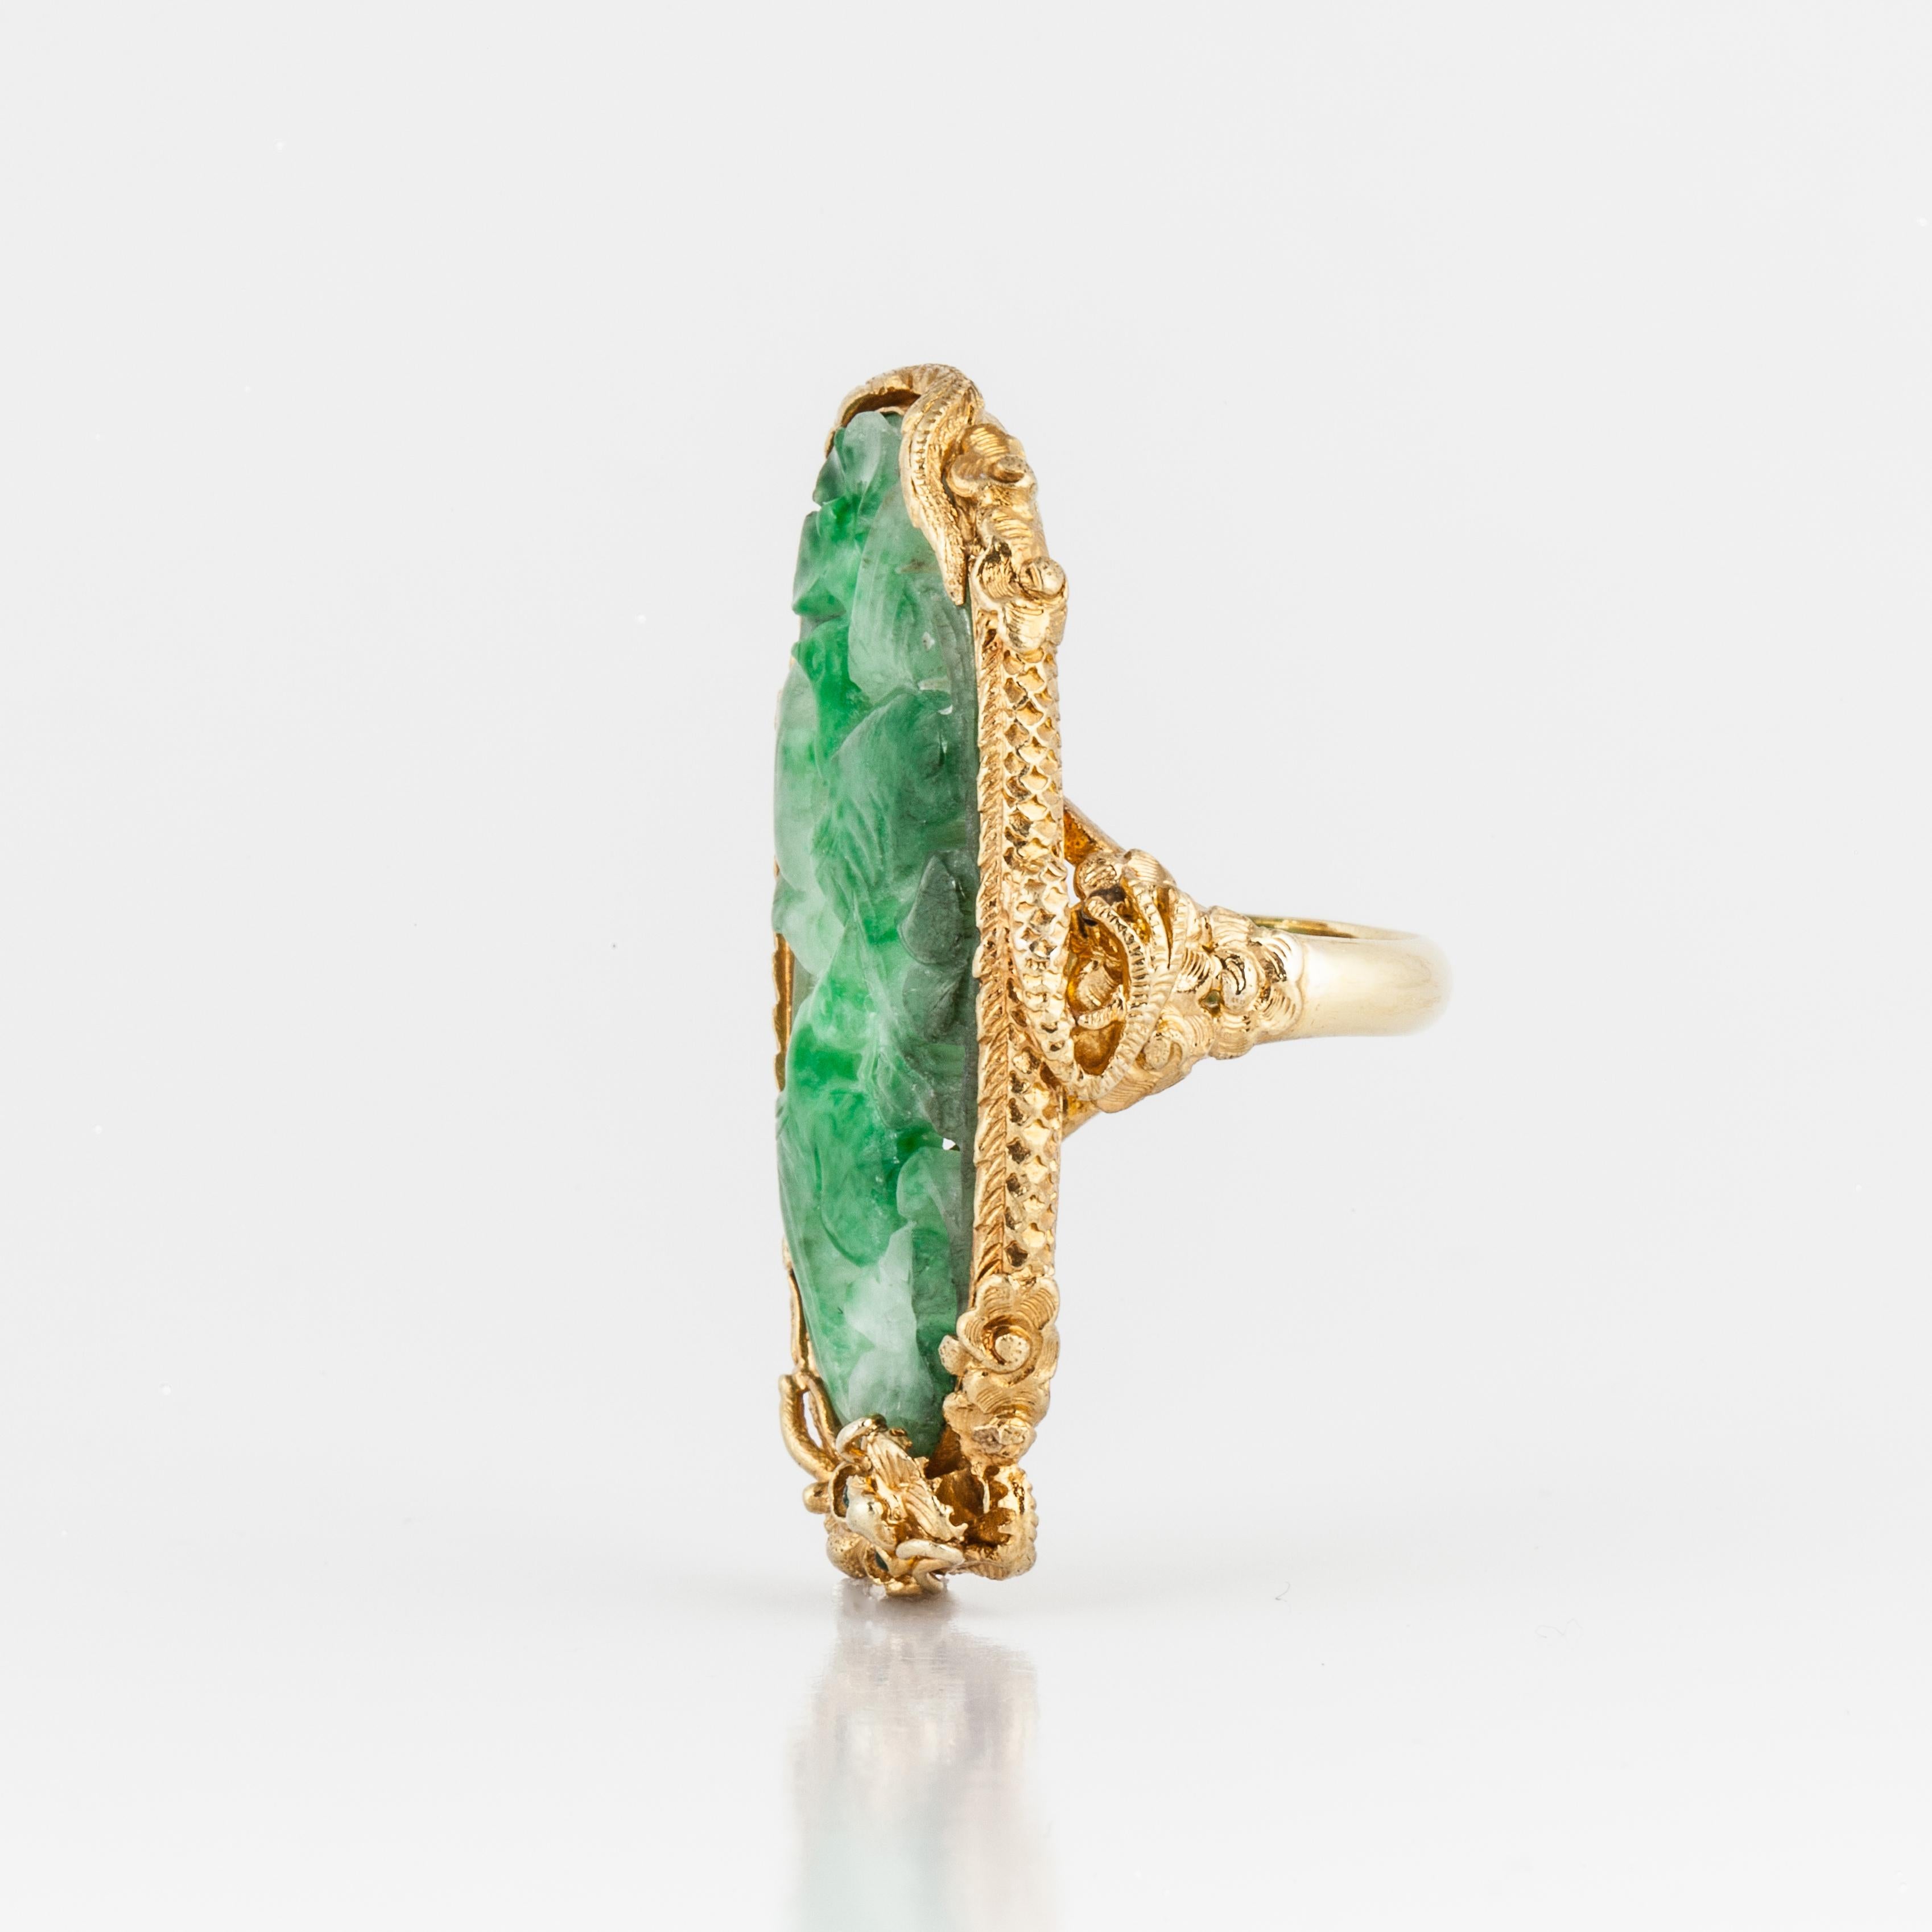 22K yellow gold ring with carved jadeite that has a bird motif.  Surrounding the Jadeite, is a gold dragon with green eyes.  Ring is currently a size 5 1/4.  Presentation area measures 3/4 of an inch wide by 1 1/2 inches in length.